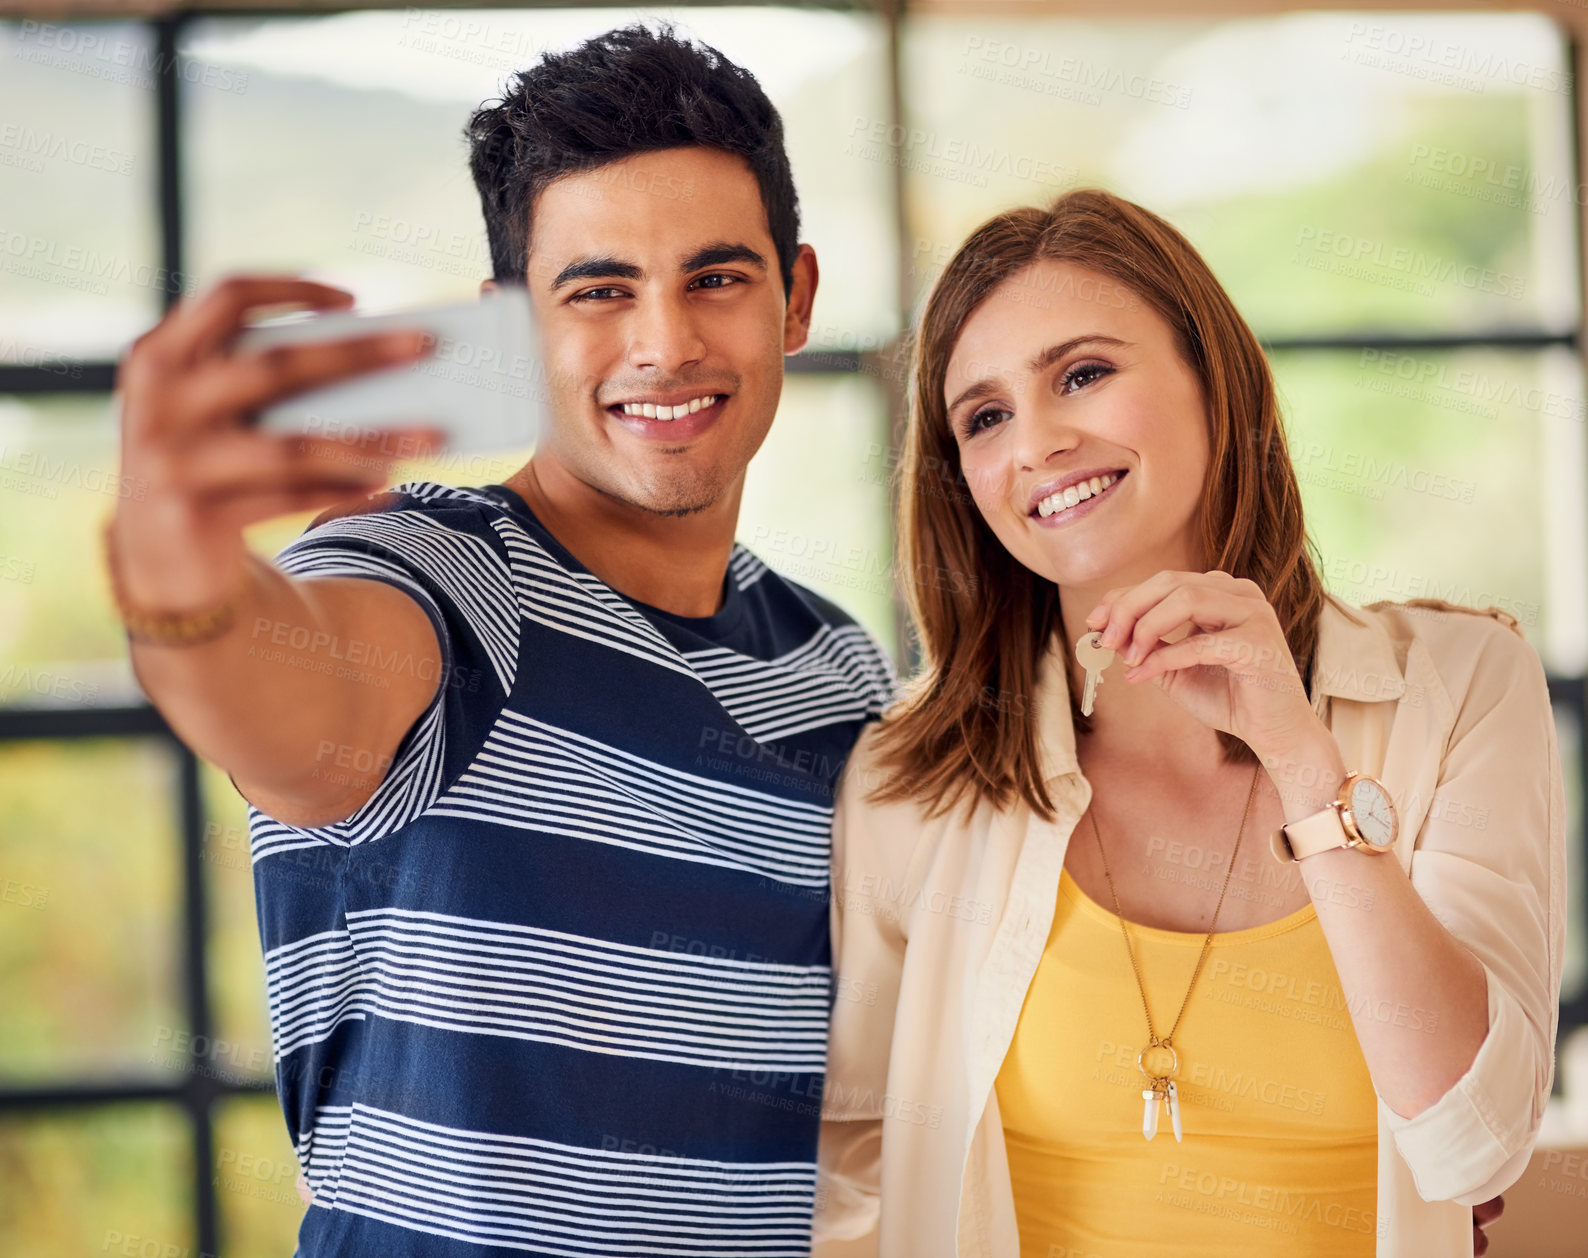 Buy stock photo Shot of a happy young couple taking a selfie together on their moving in day